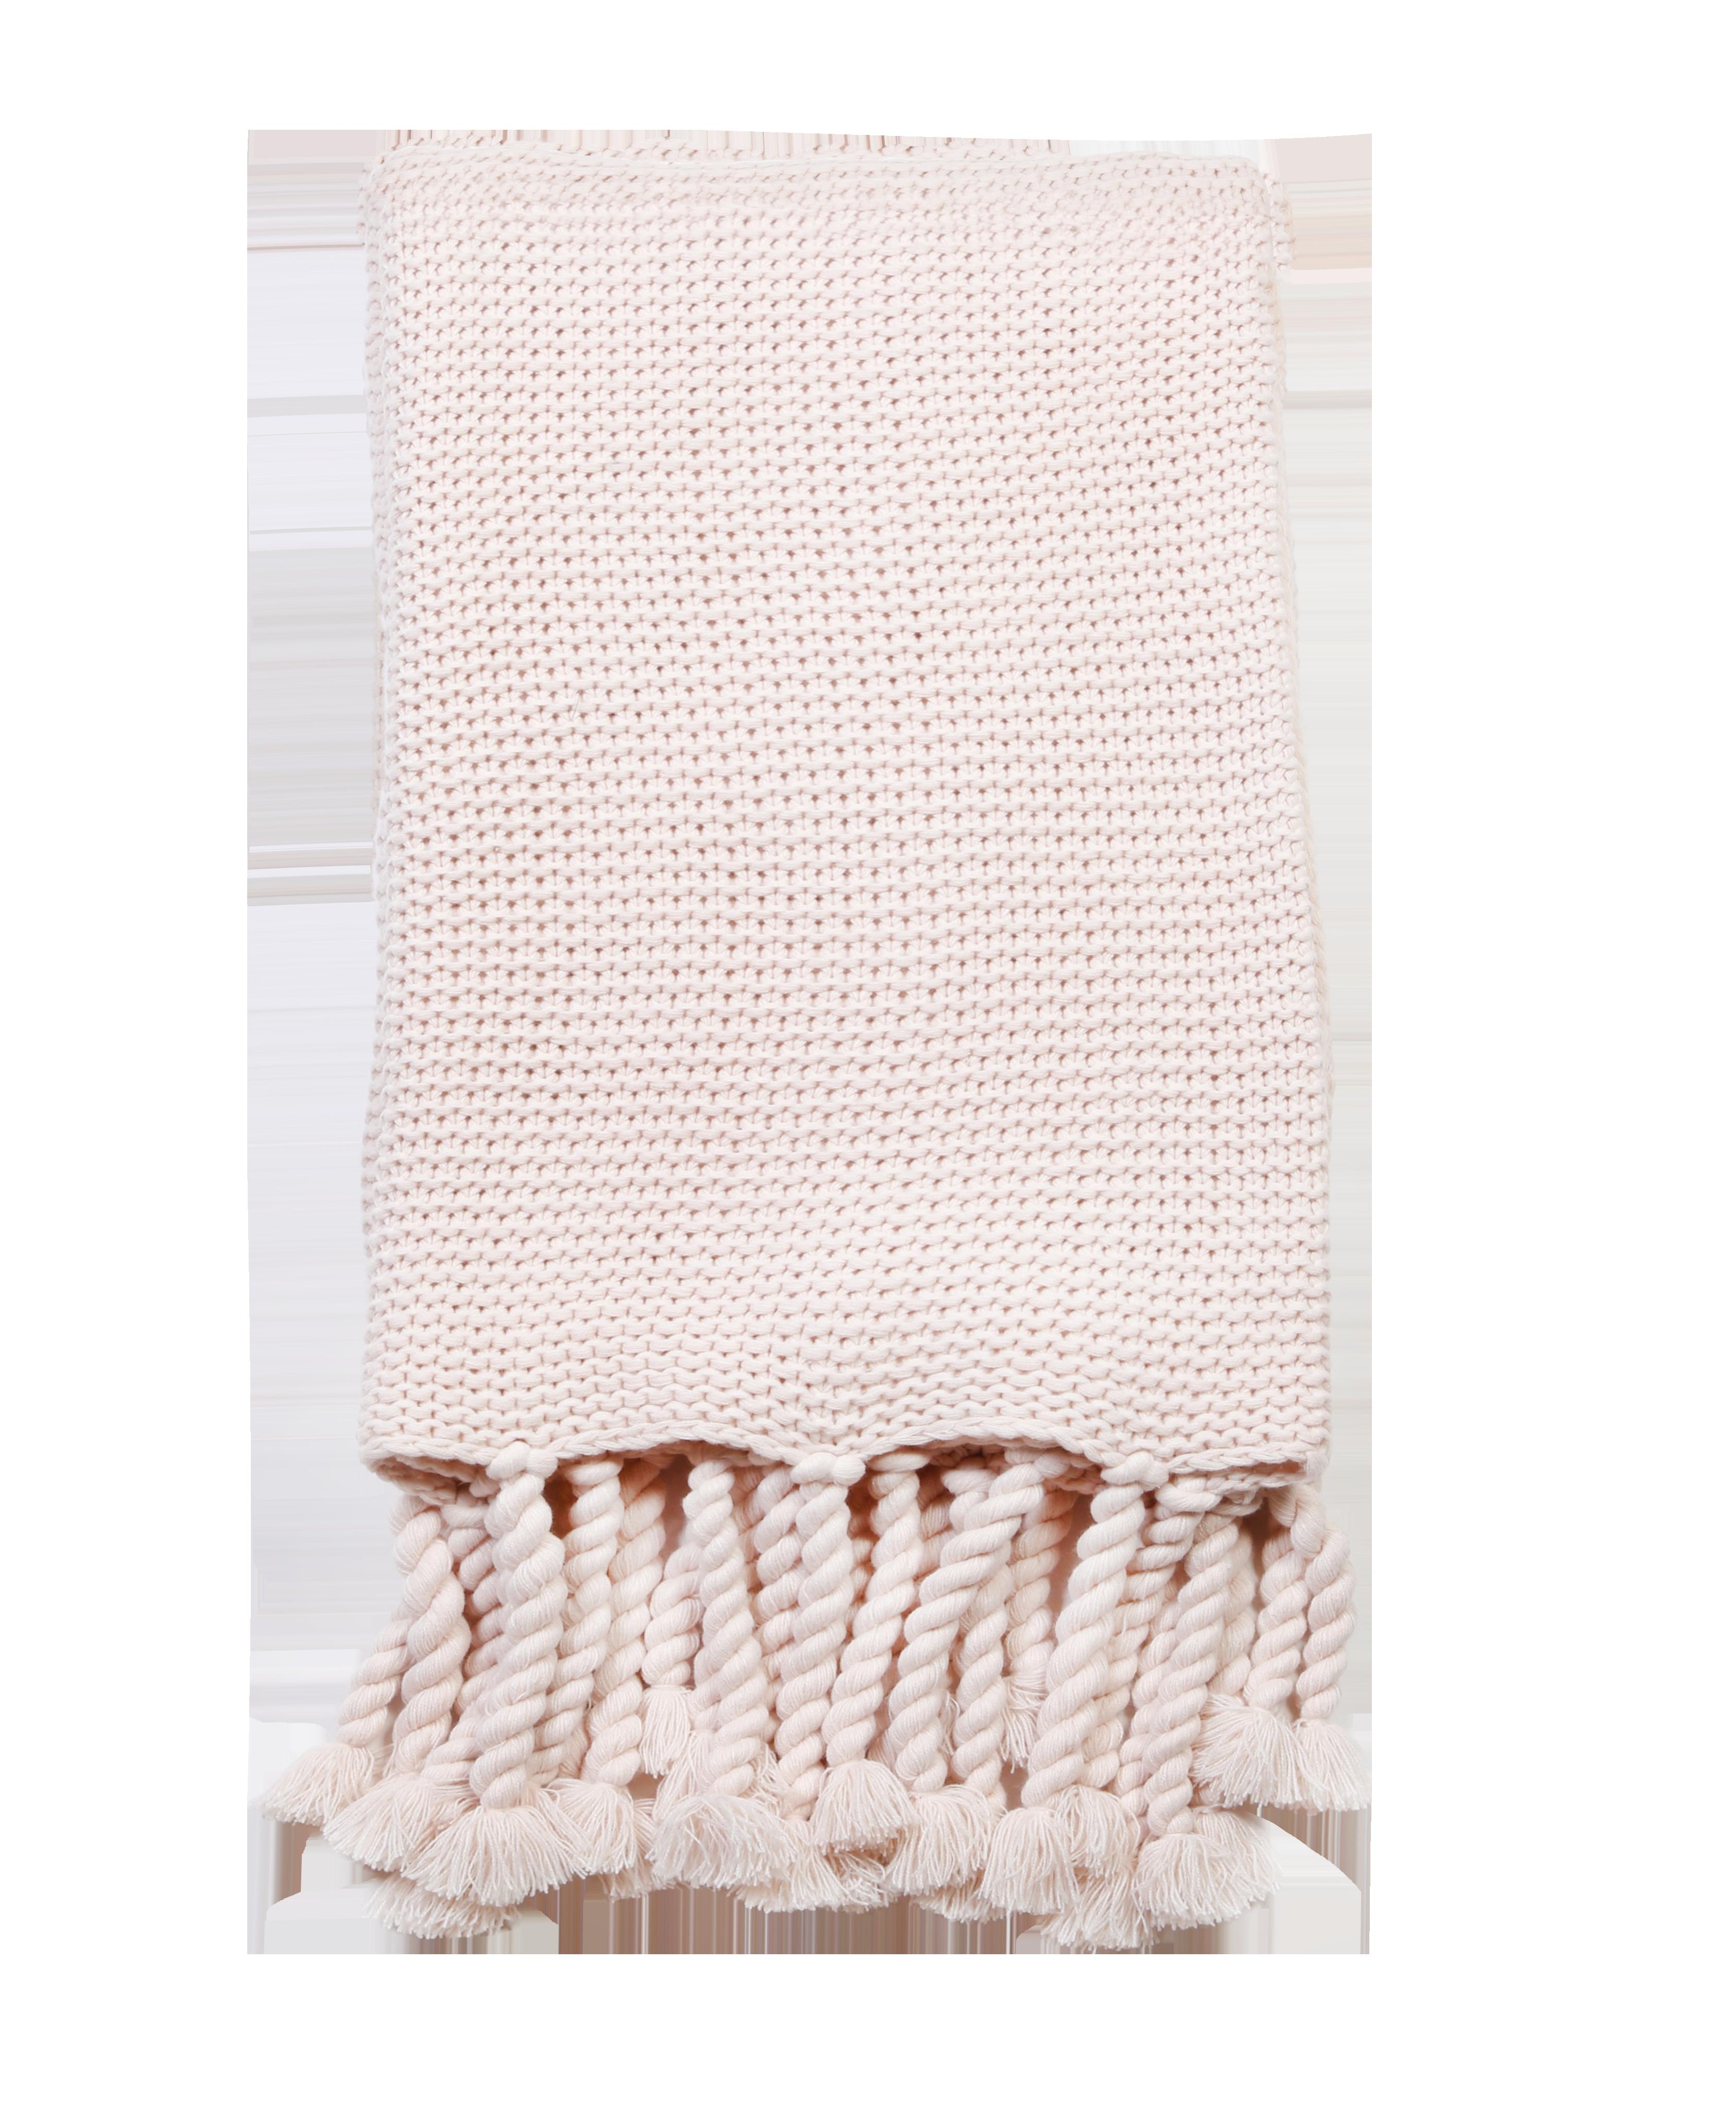 Trestles Chunky Knit Throw by Pom Pom at Home - Image 1